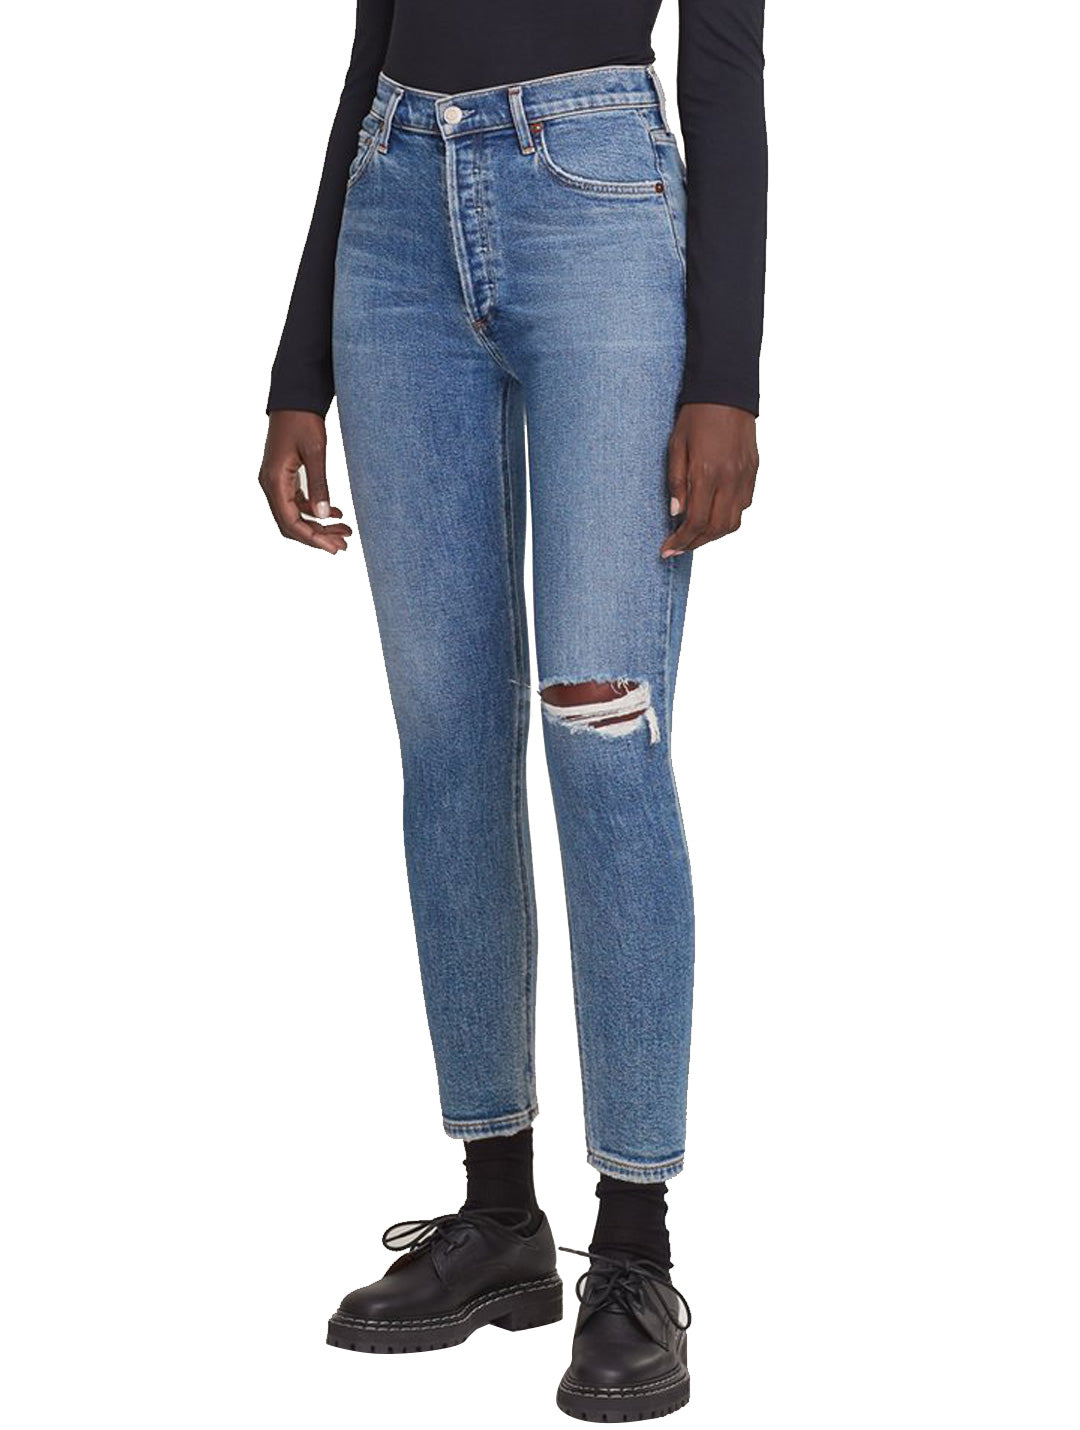 Agolde - Nico High Rise Jeans Jeans Agolde 